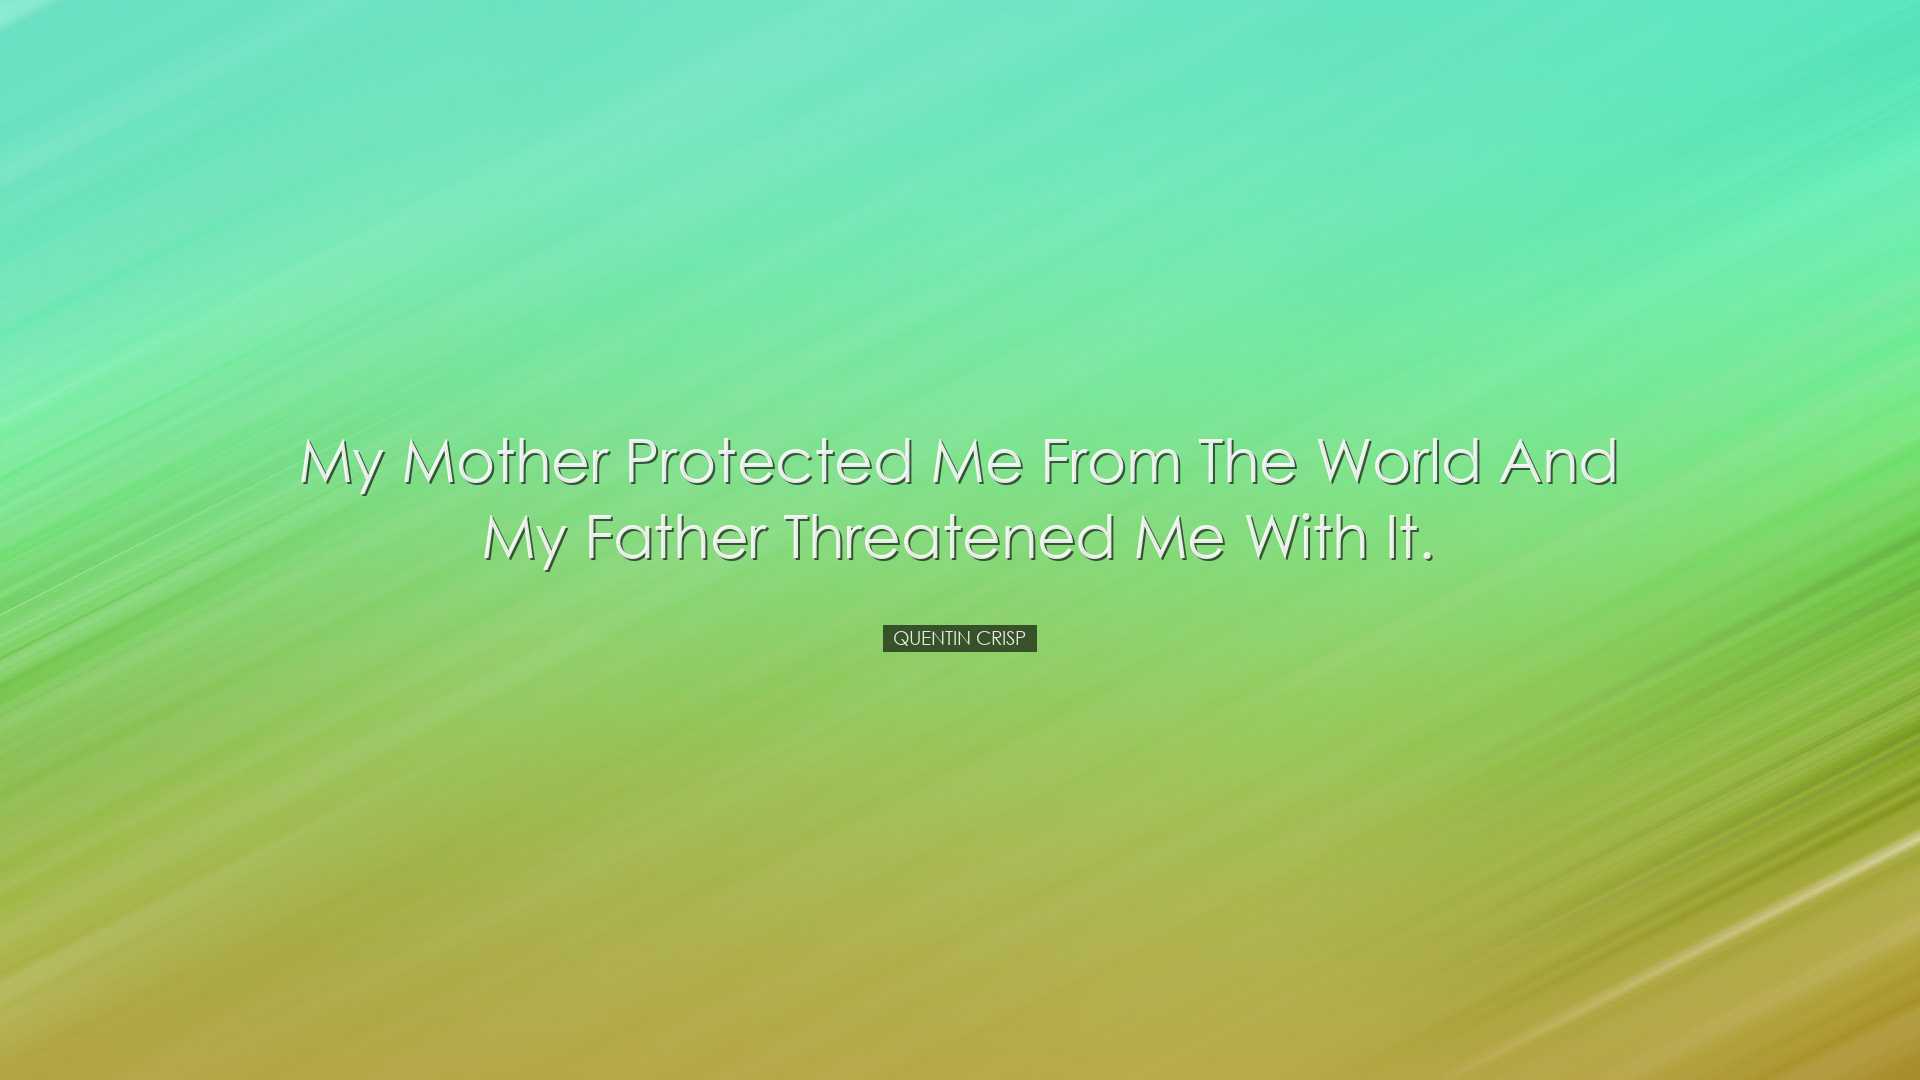 My mother protected me from the world and my father threatened me